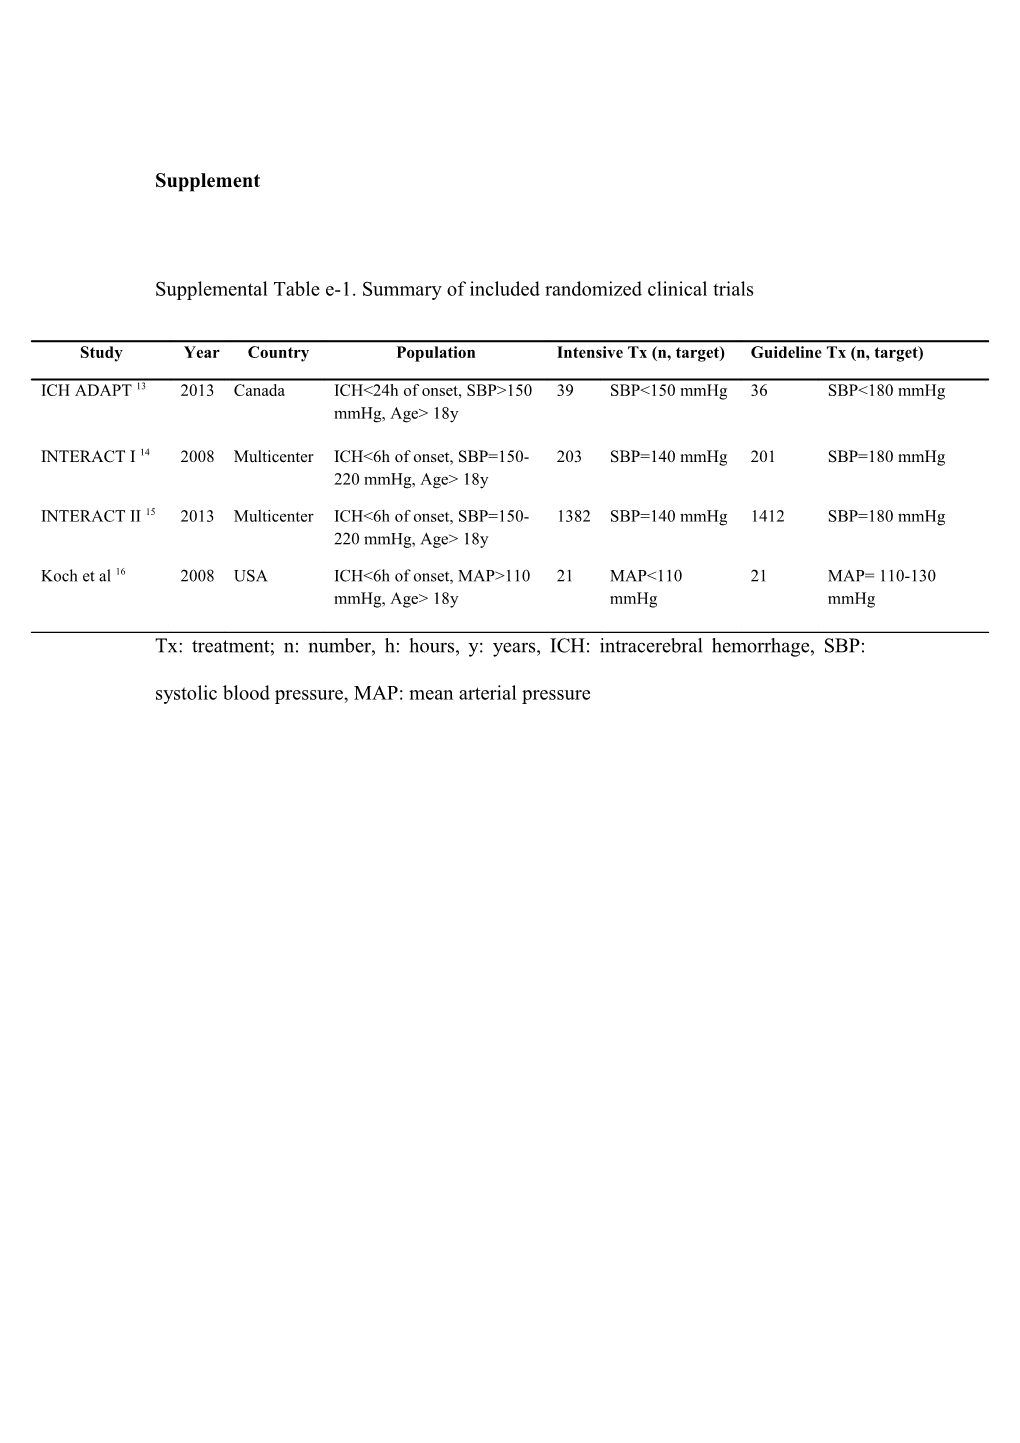 Supplemental Table E-1. Summary of Included Randomized Clinical Trials